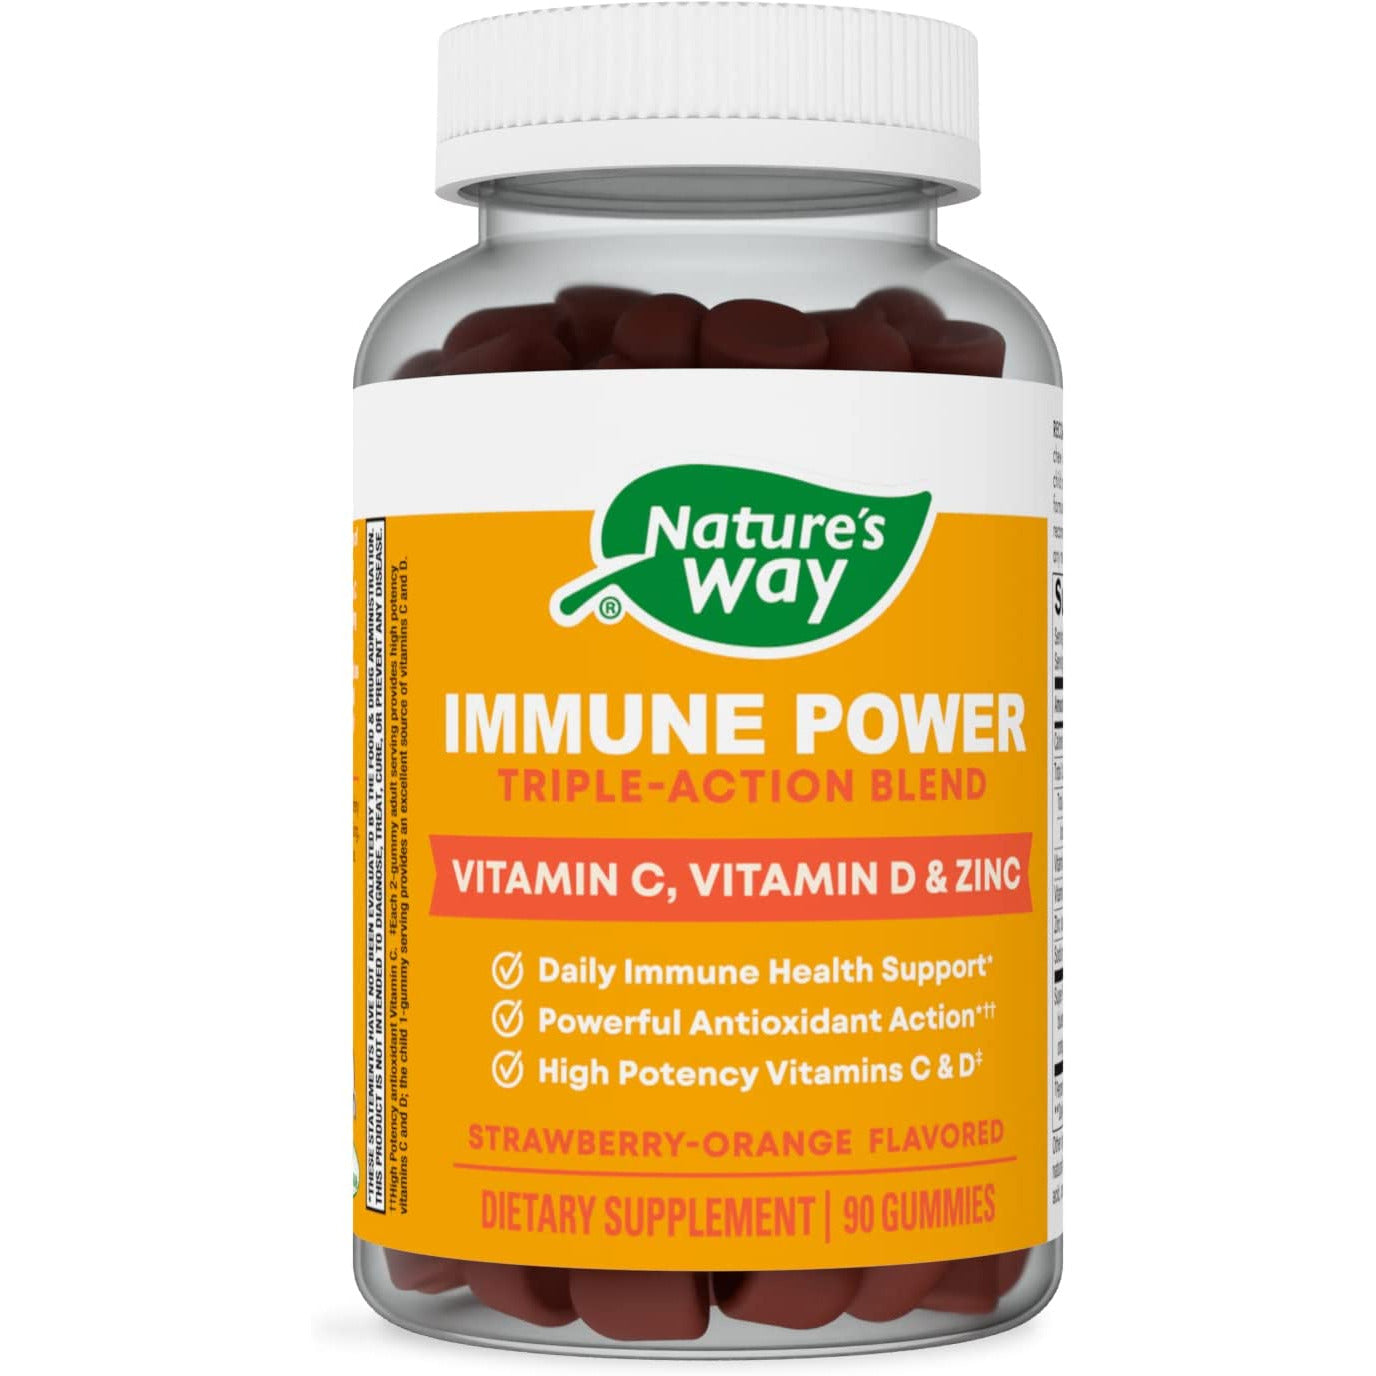 Nature's Way Immune Power, Triple Action Immune Support Blend